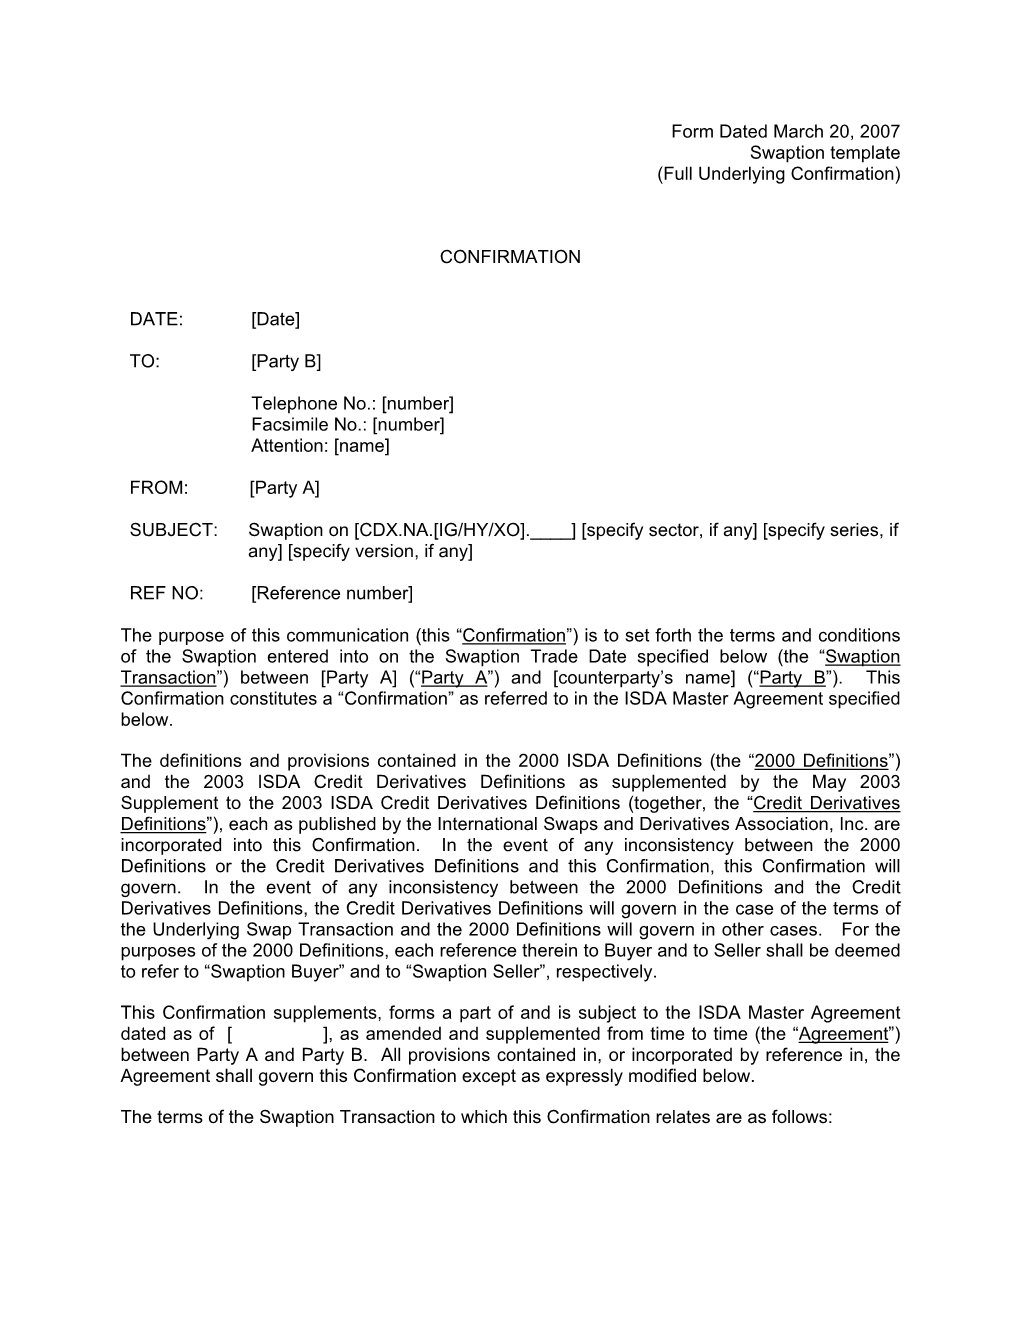 Form Dated March 20, 2007 Swaption Template (Full Underlying Confirmation)